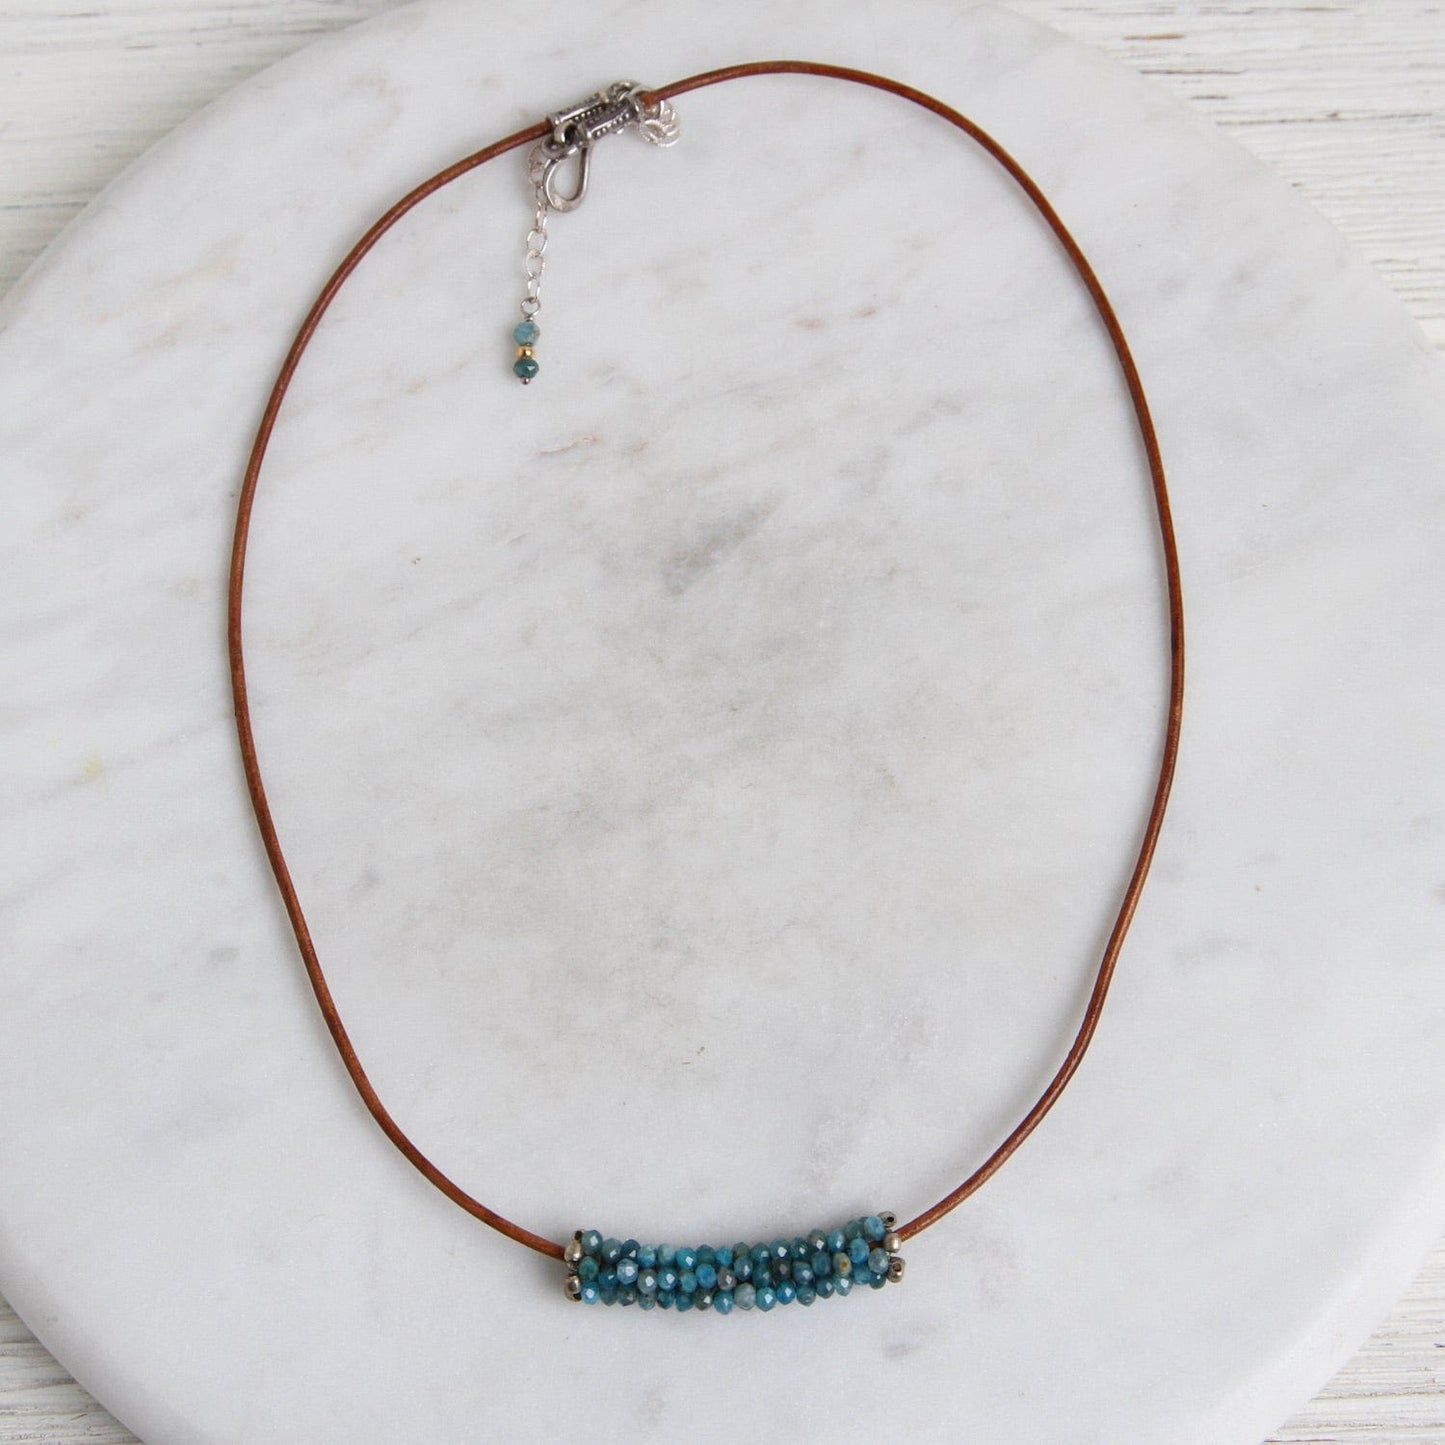 NKL-JM Hand Stitched Apatite Leather Necklace